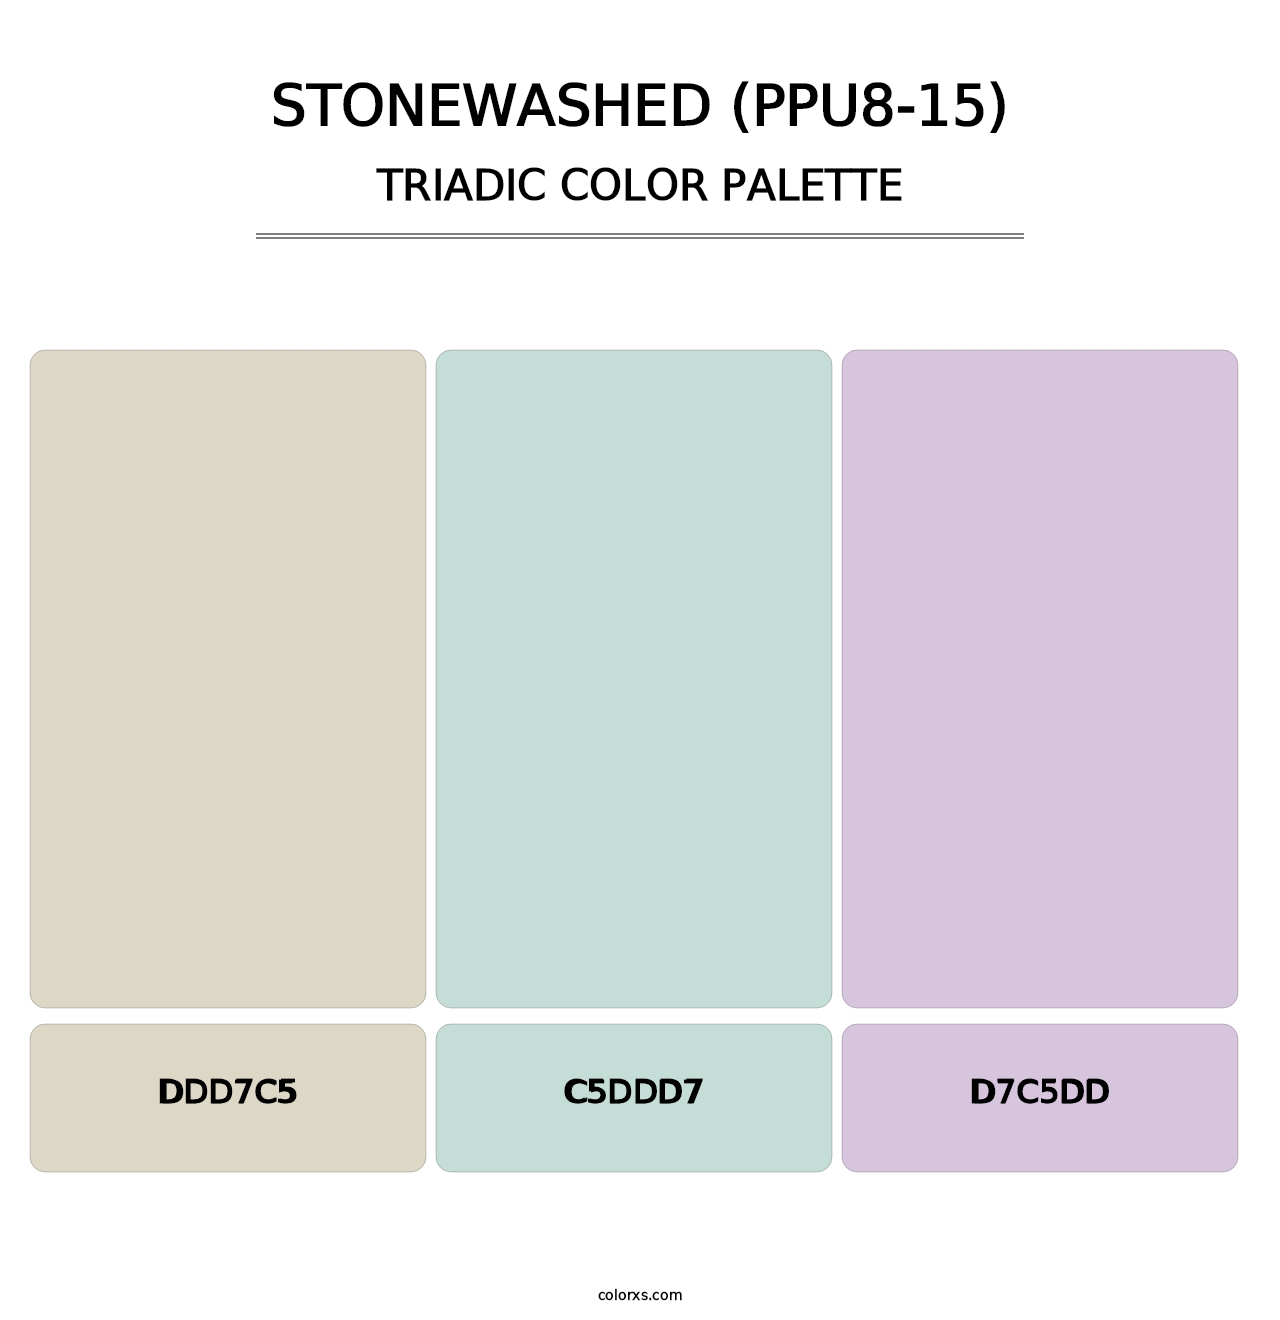 Stonewashed (PPU8-15) - Triadic Color Palette